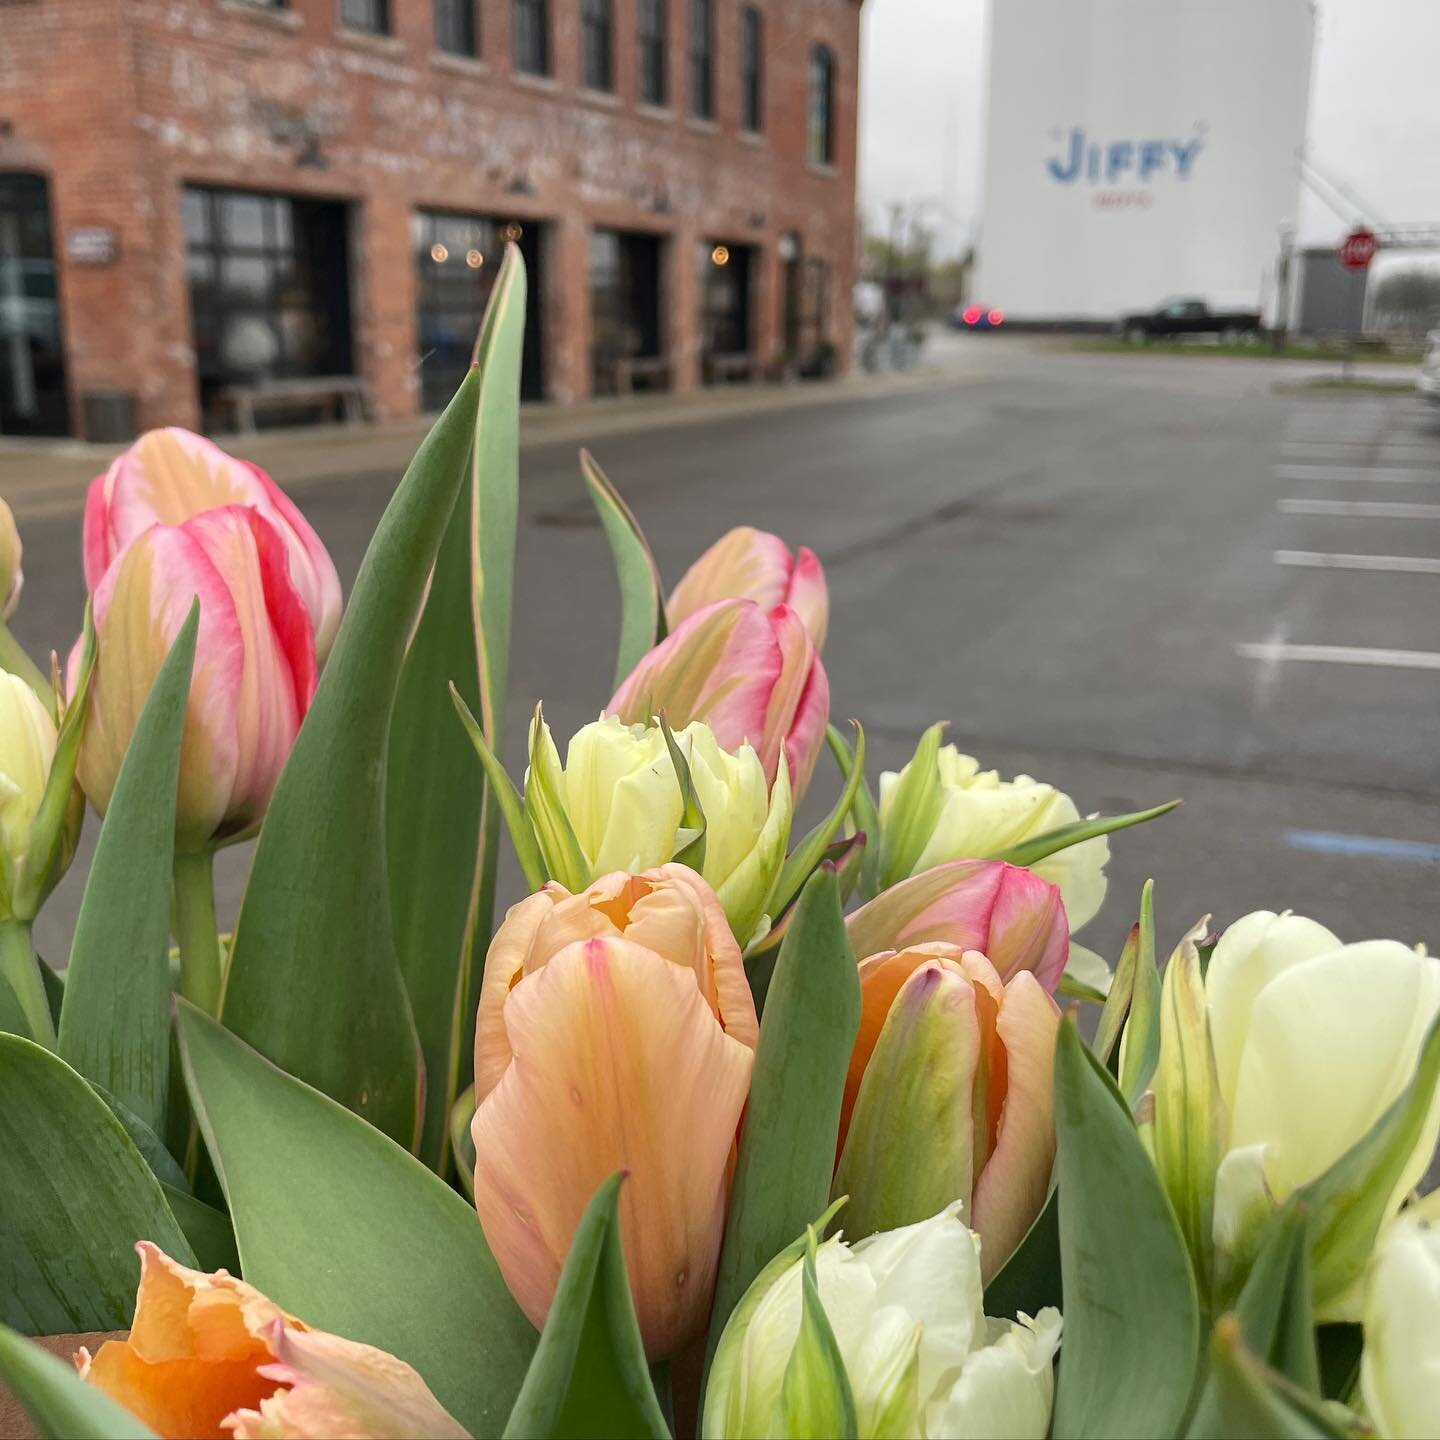 Get your tulip bouquet today @agricolefarmstop! More tulips will be pouring into the market this weekend.

#seasonalflowers #tulipseason #michigangrown #pesticidefree #organicallygrown #grownnotflown #michiganflowerfarm #chelseami #chelseamichigan #c